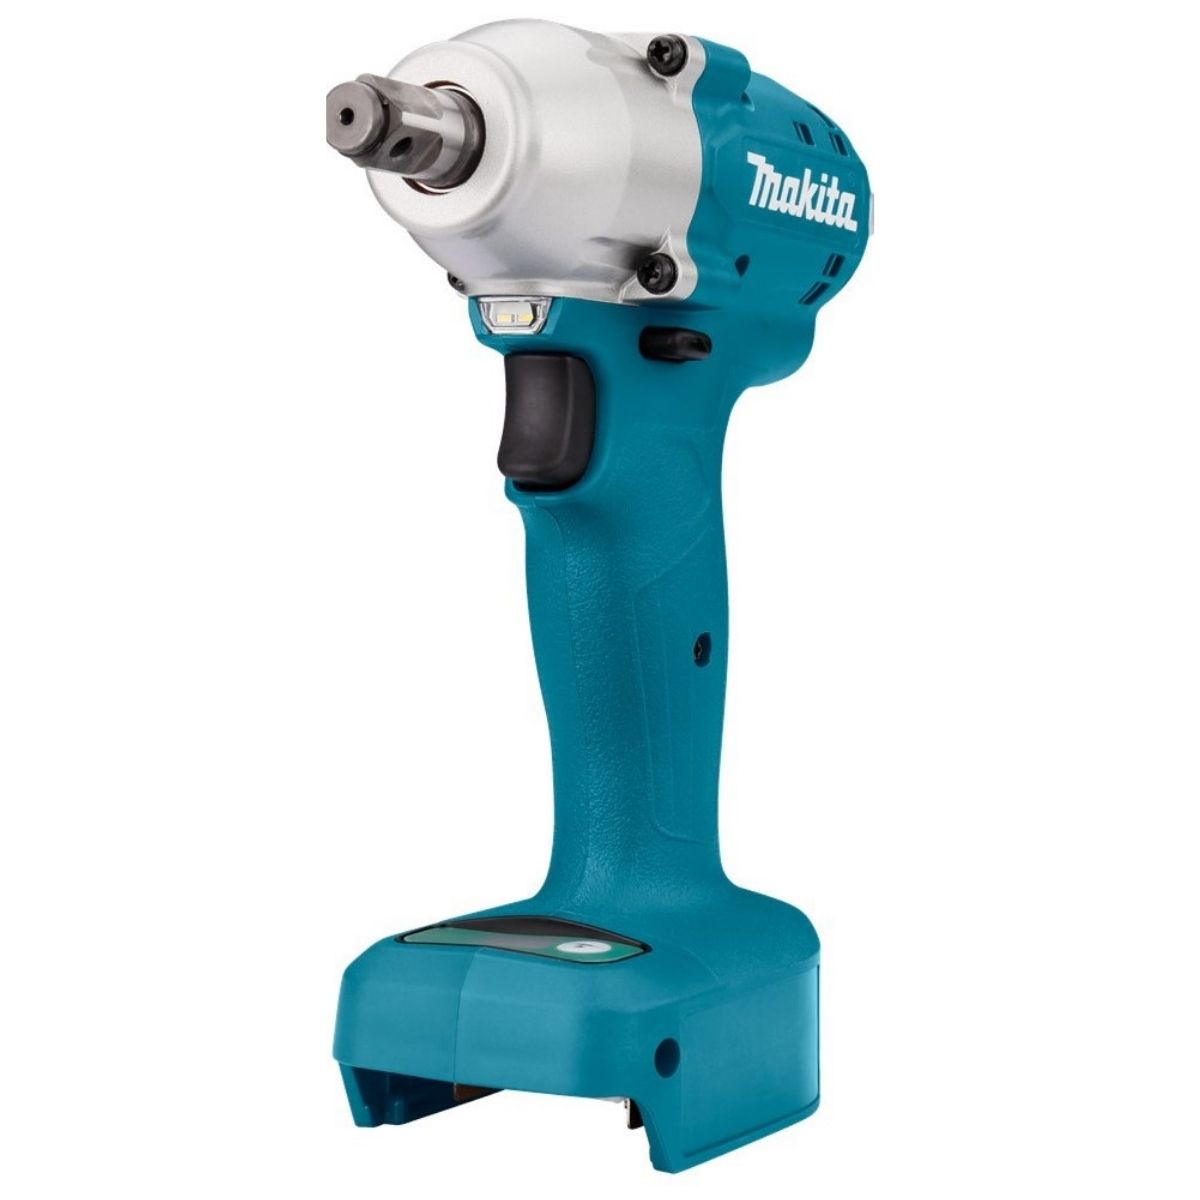 Makita DTWA190Z 14.4V LXT Brushless Impact Wrench Body Only